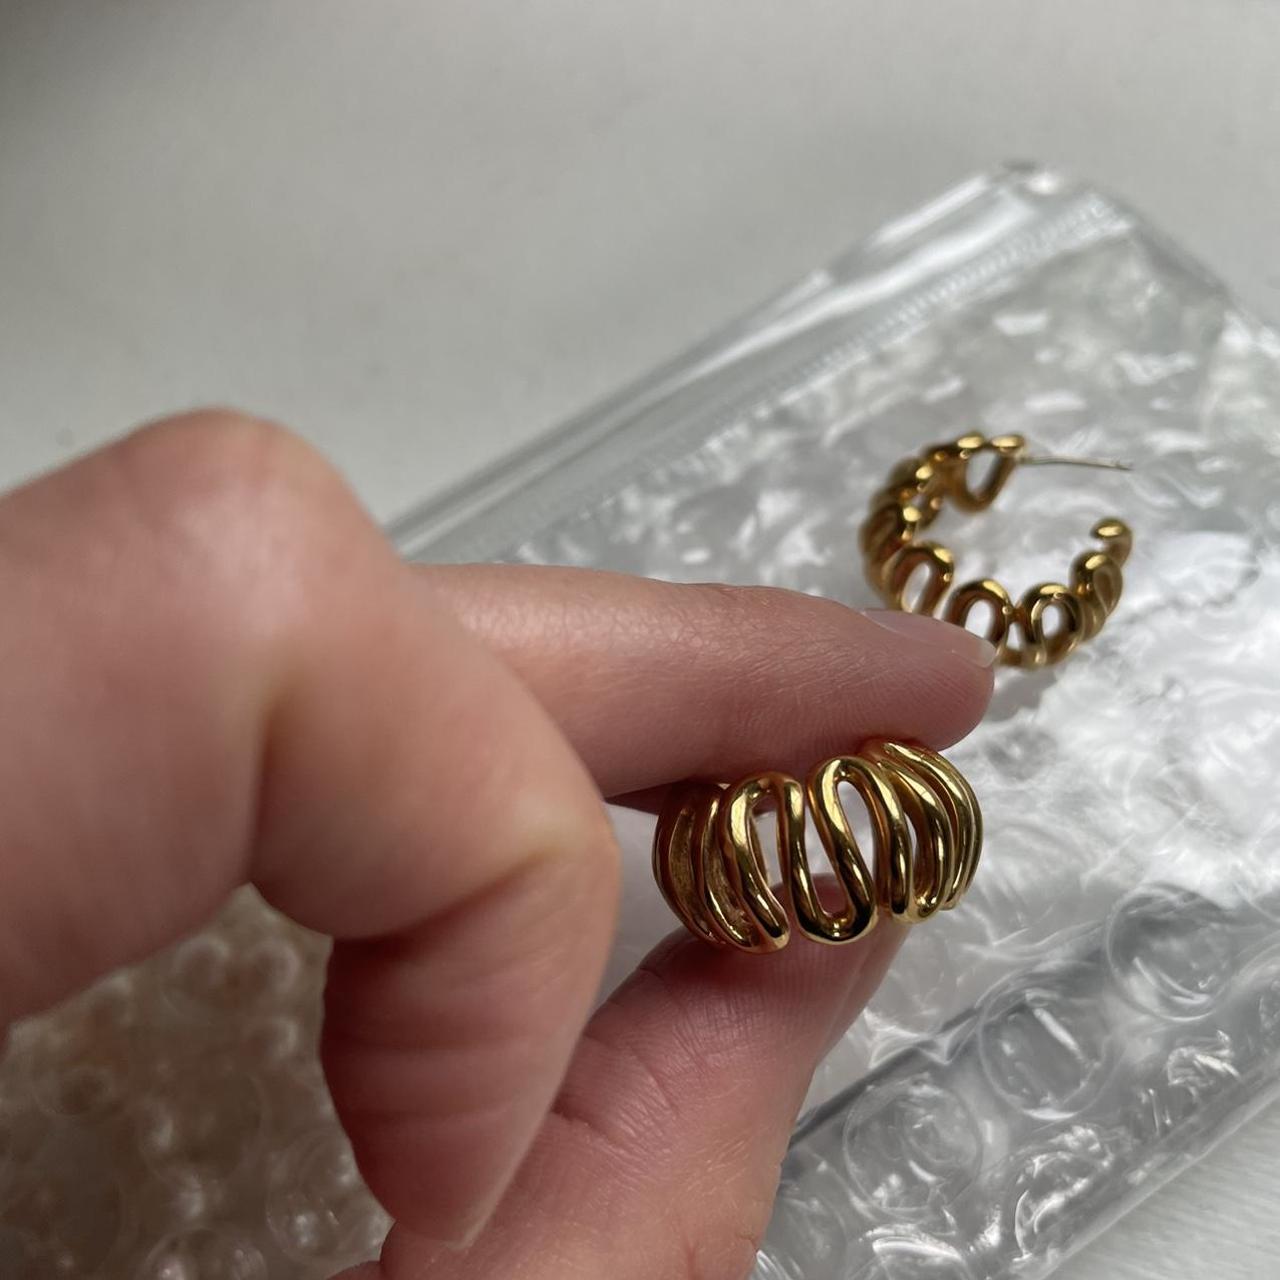 Product Image 3 - Handcrafted #SapirBachar #swirl #goldhoops. Excellent